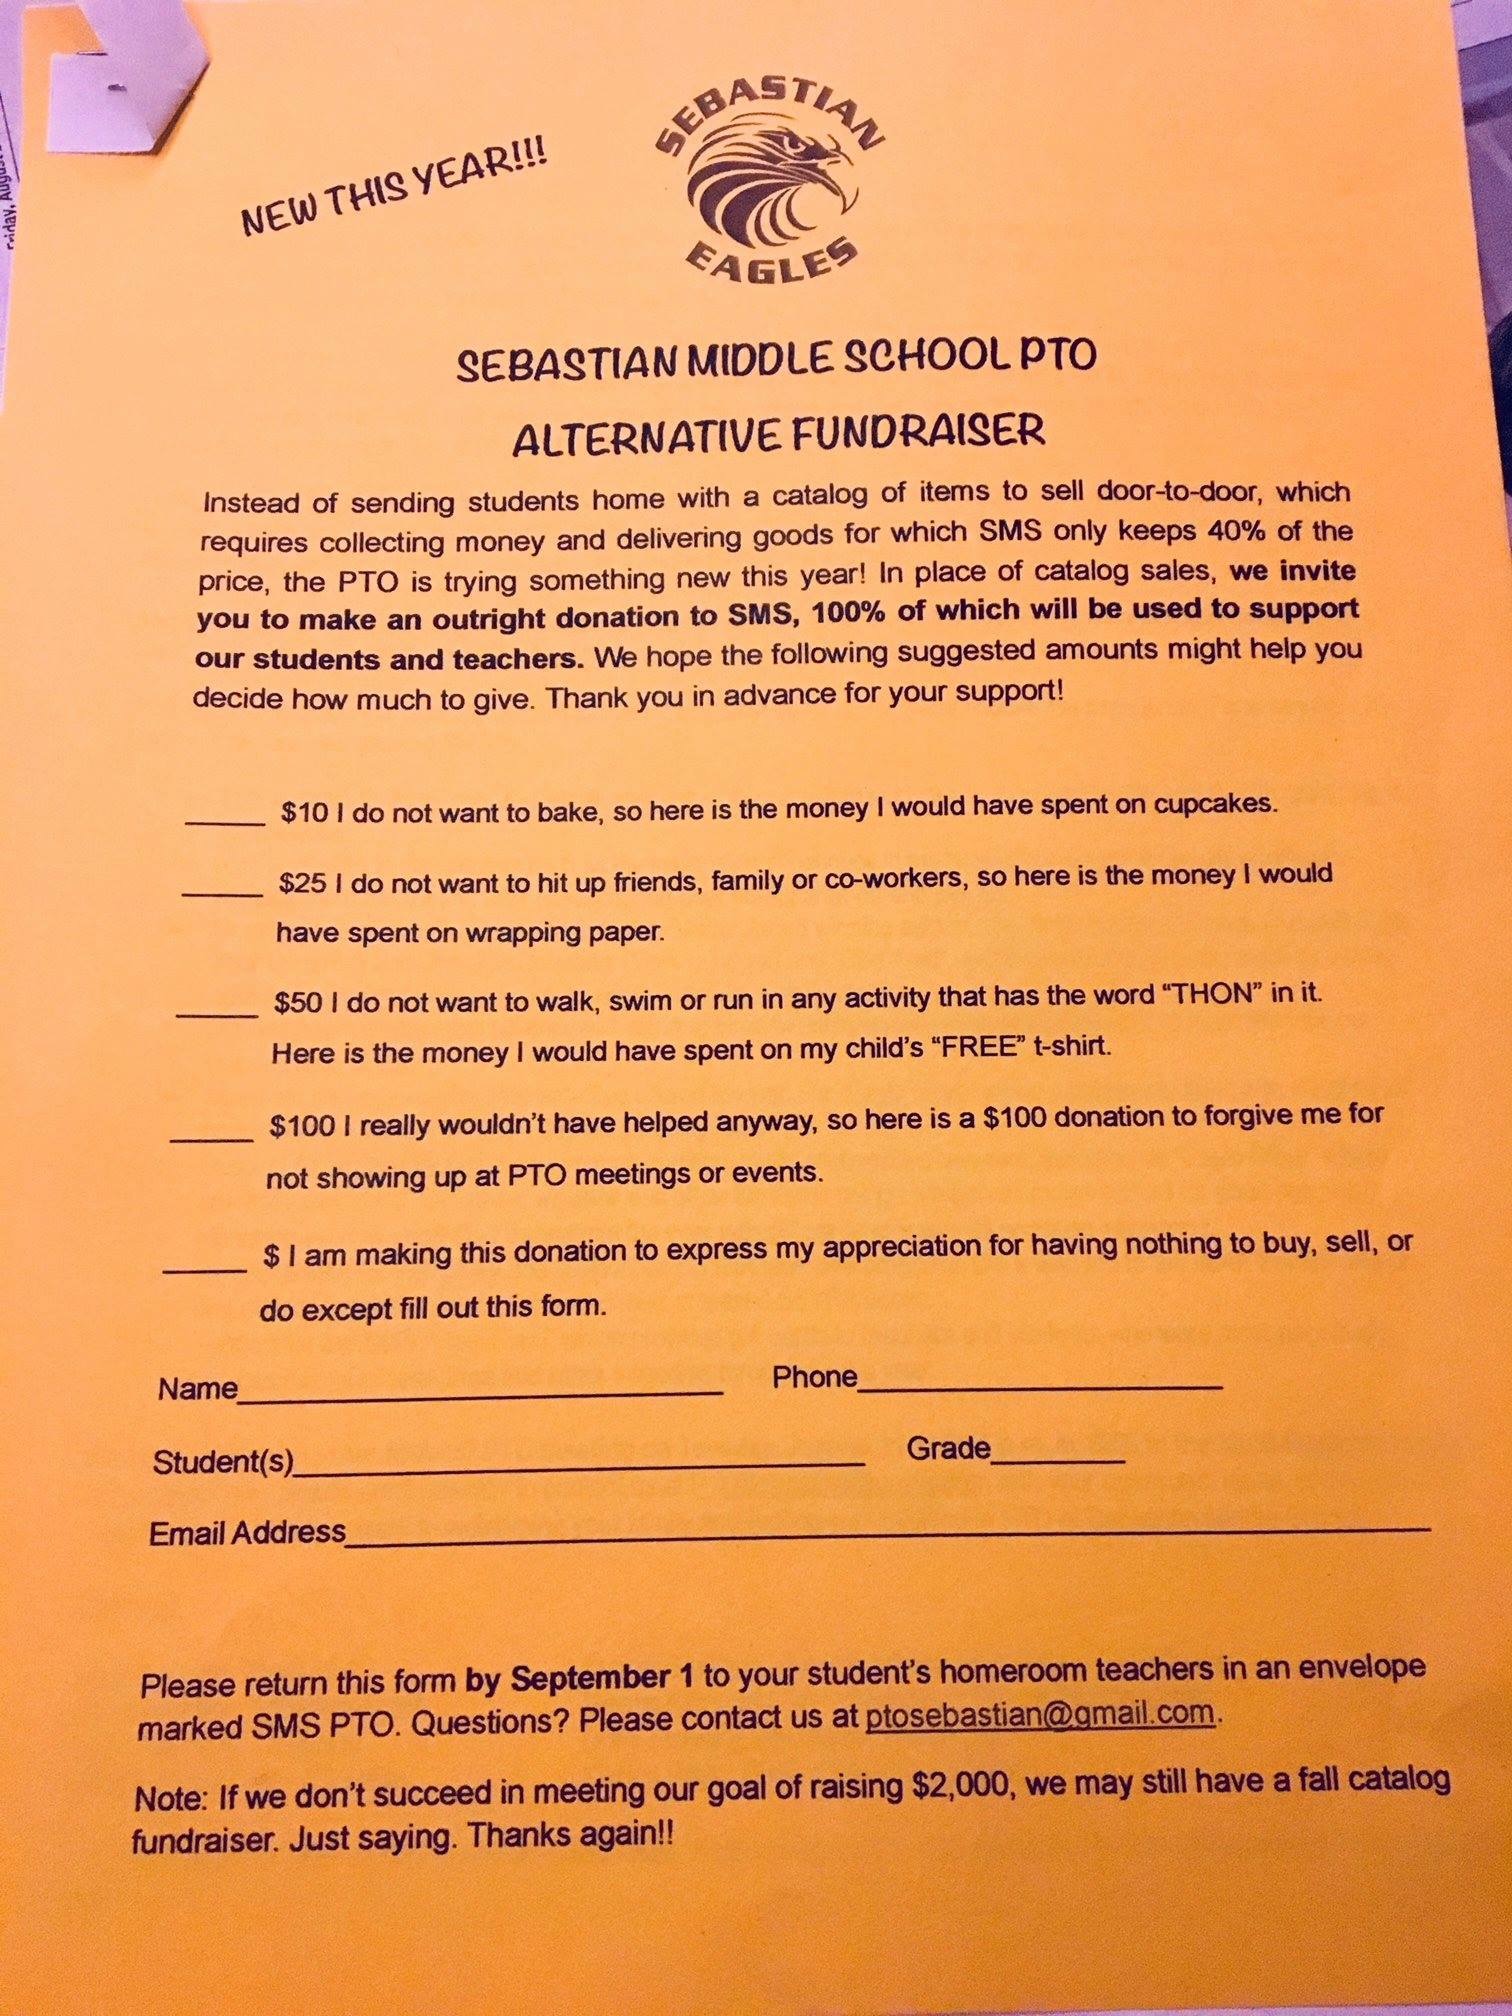 PTO Alternative Fundraisers - Some schools are saying they are limiting or getting rid of PTO and they are seeking ways to gain extra funds for the school. Sebastian Middle School